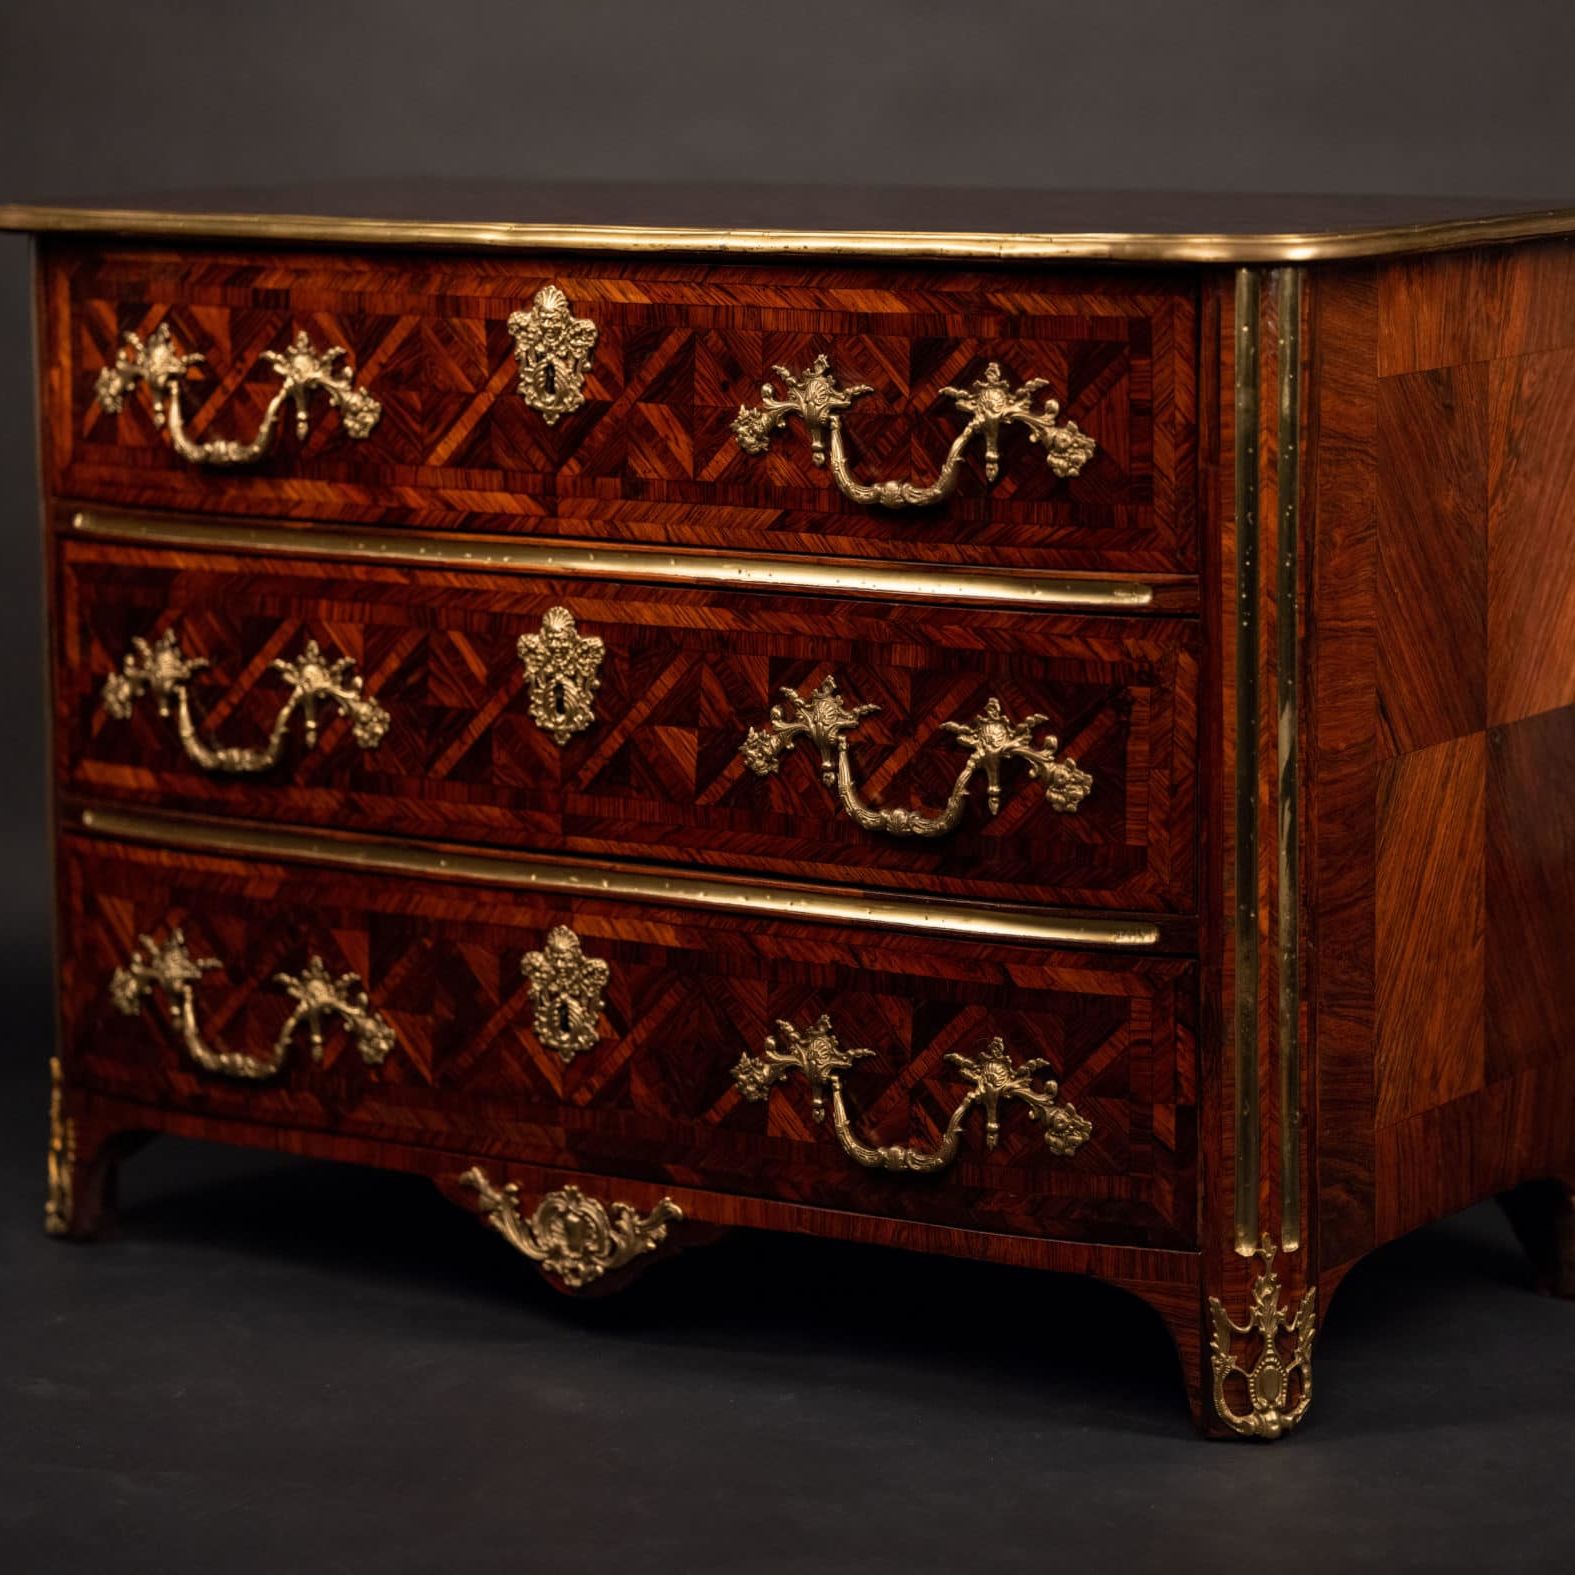 Chest of Drawers, Louis XIV Period. Early 18th century